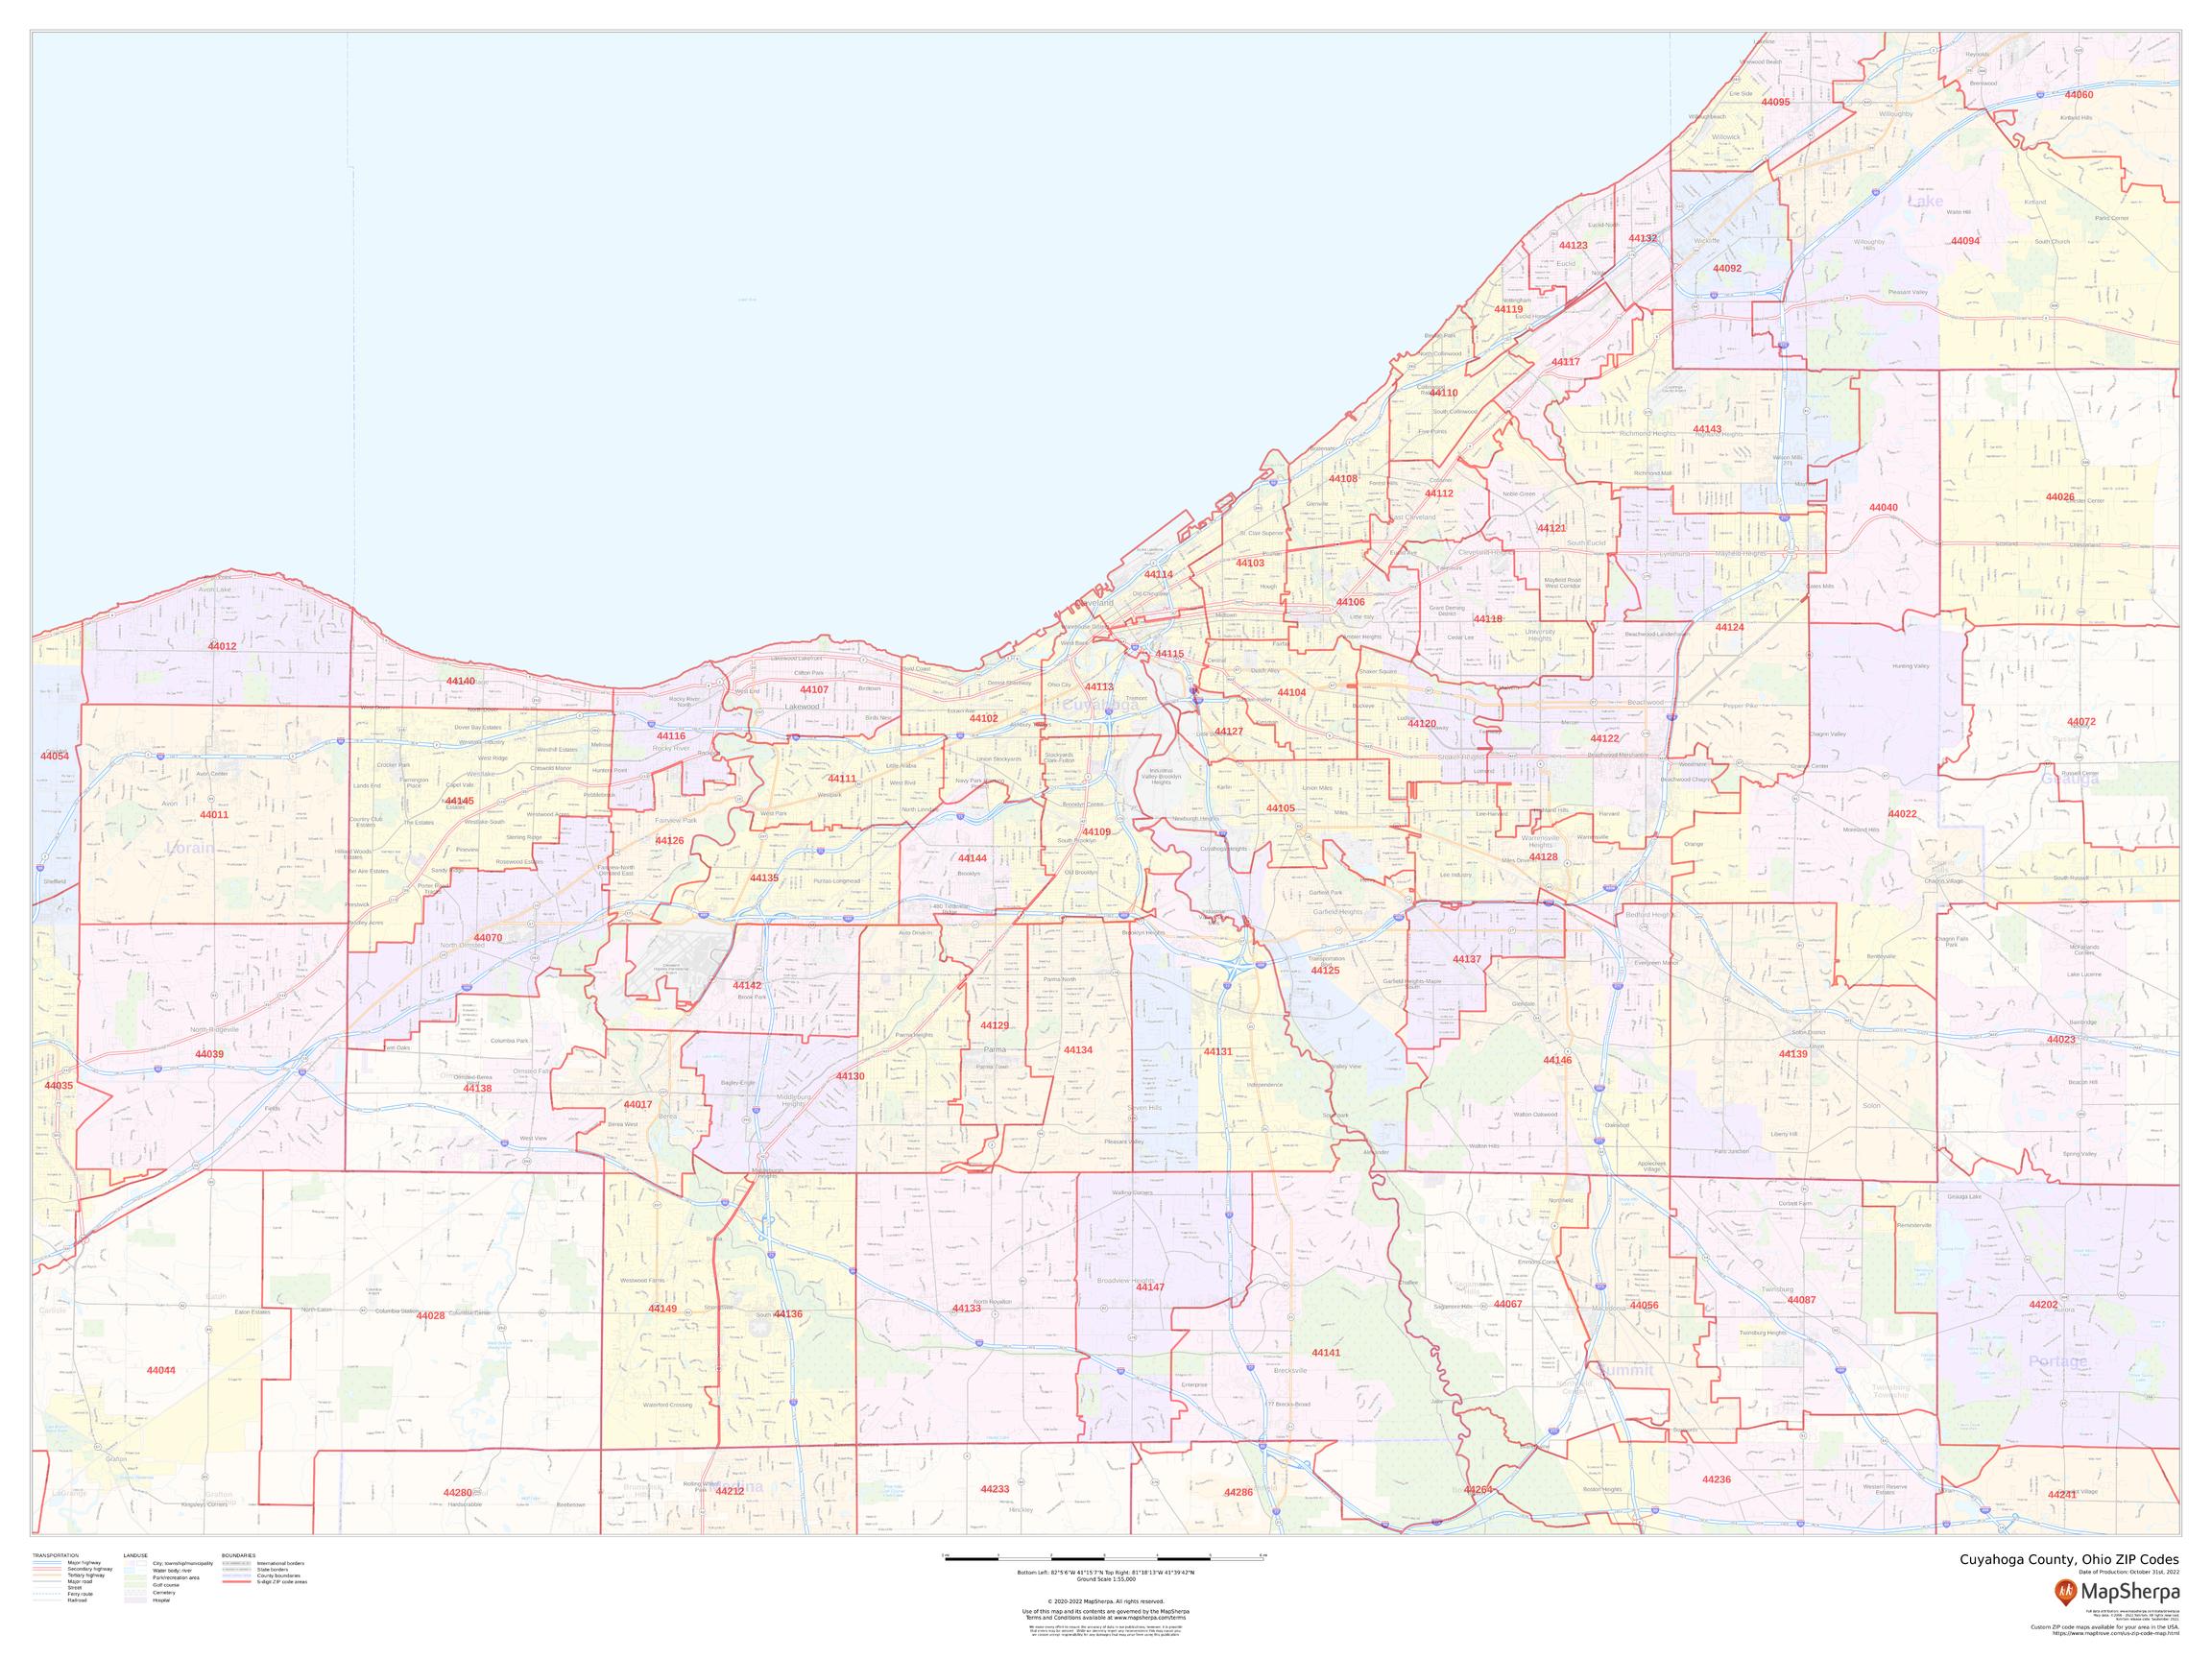 Cuyahoga County Ohio Zip Codes By Mapsherpa The Map Shop 9272